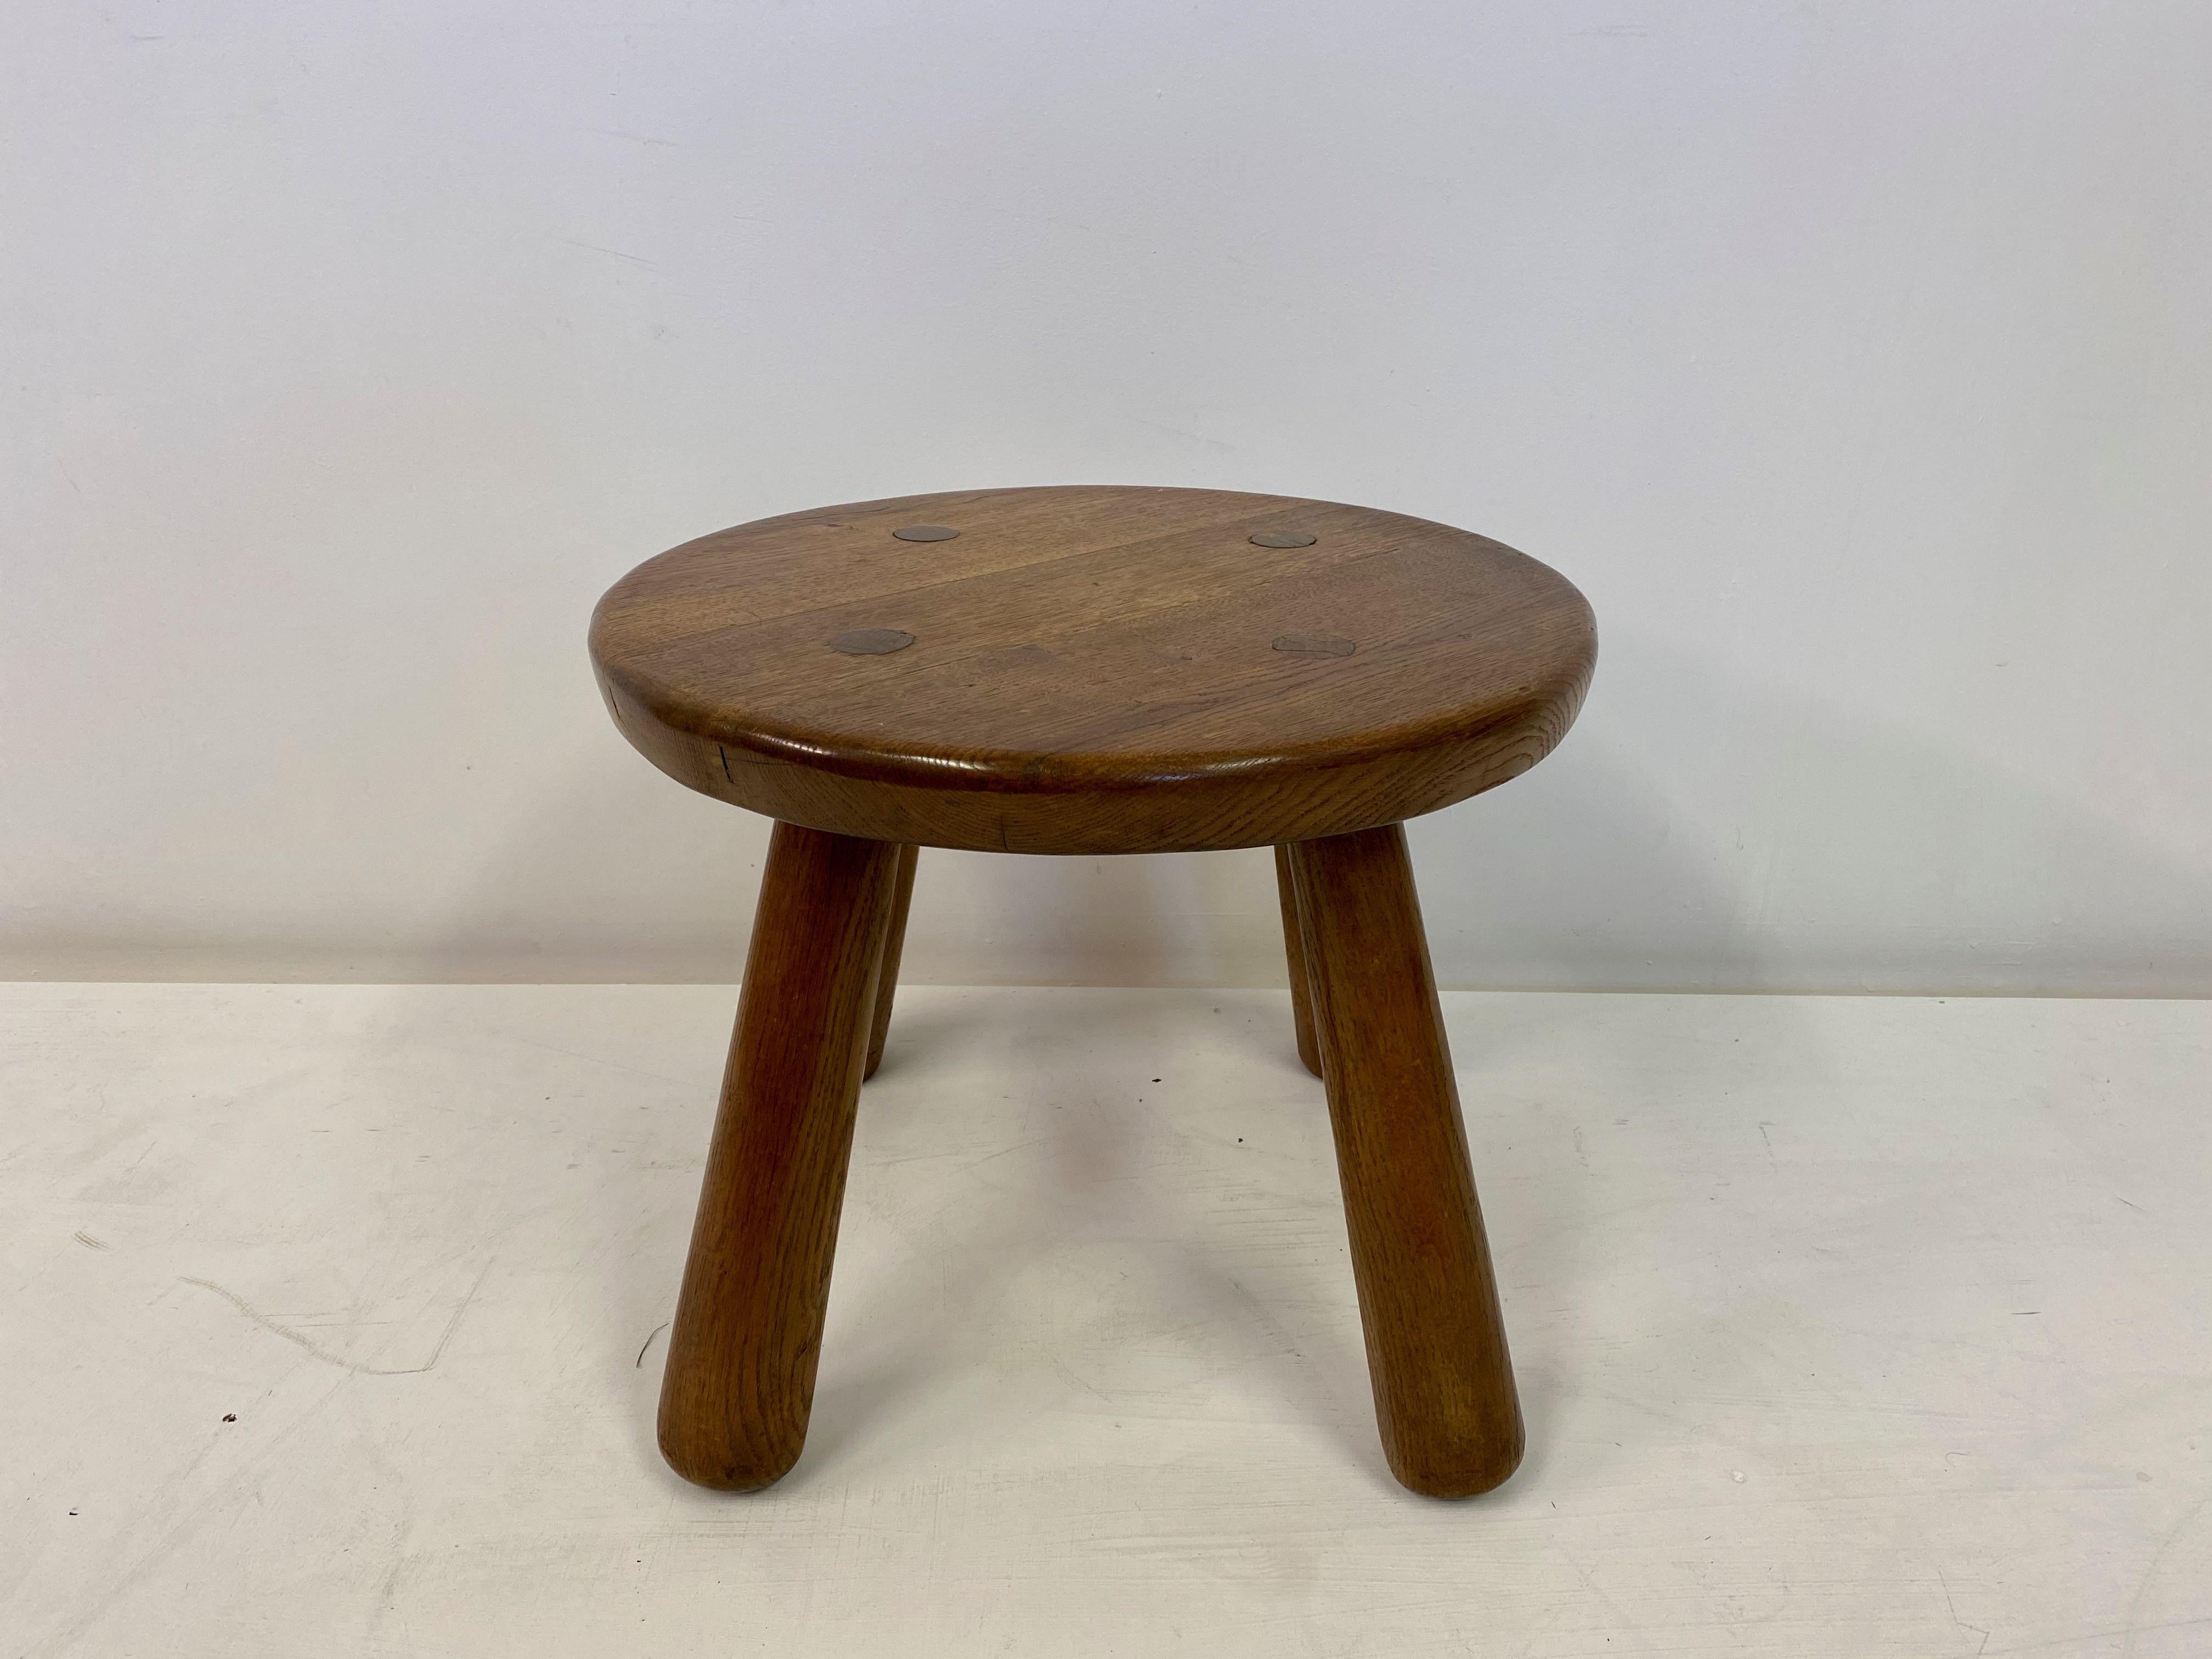 Round coffee or side table

Oak

Tapering cylindrical legs

Simple style - similar to Philip Arctander designs

Mid to late 20th century.